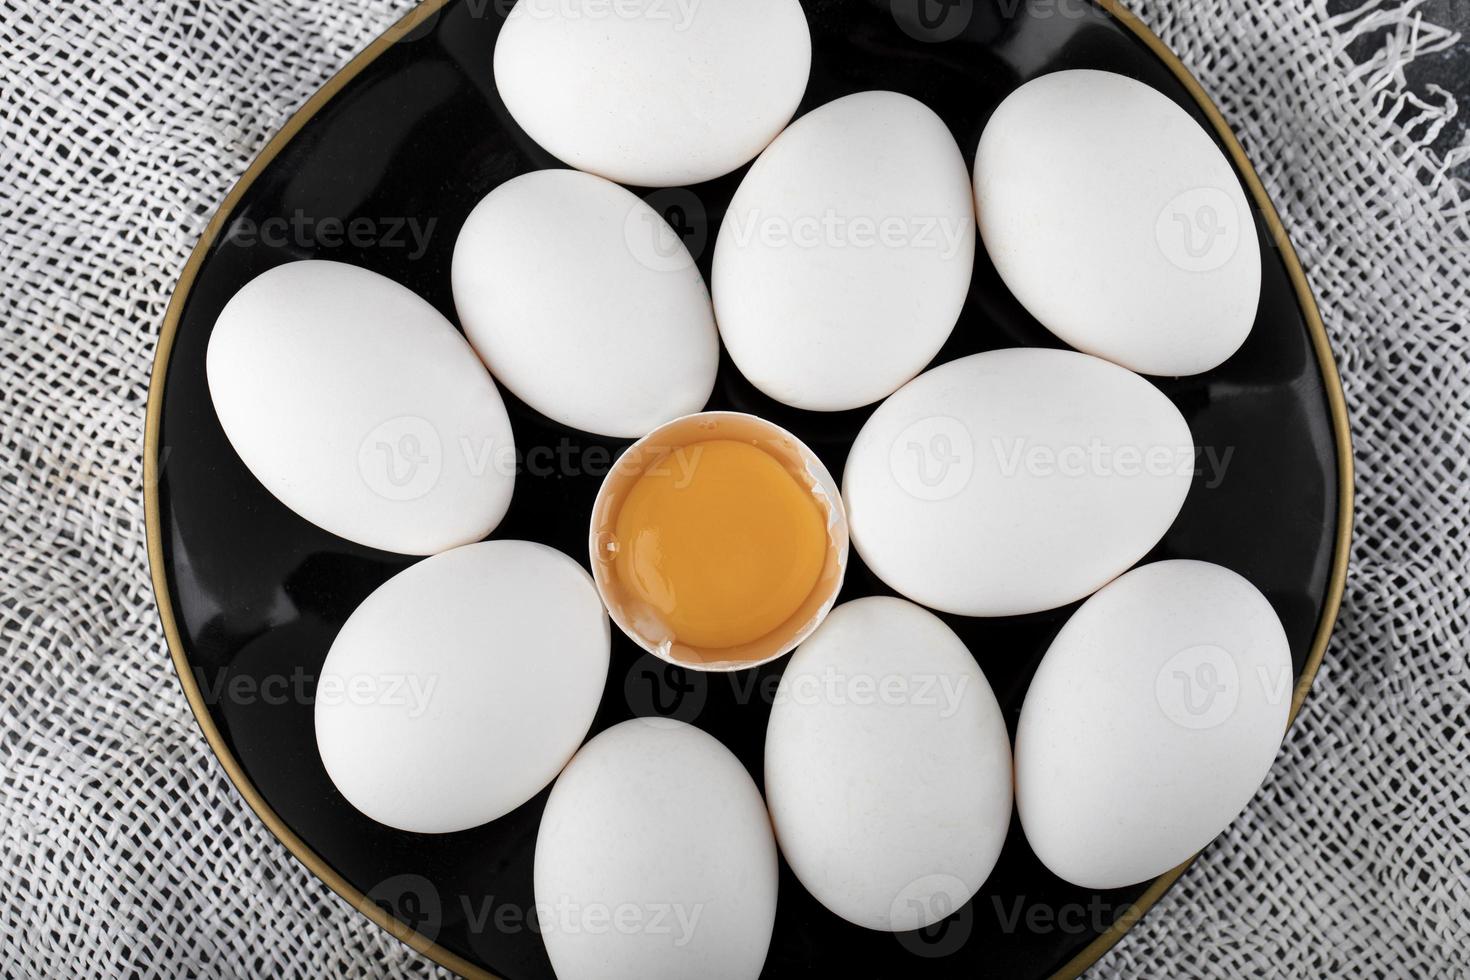 White eggs and yolk on a black plate photo